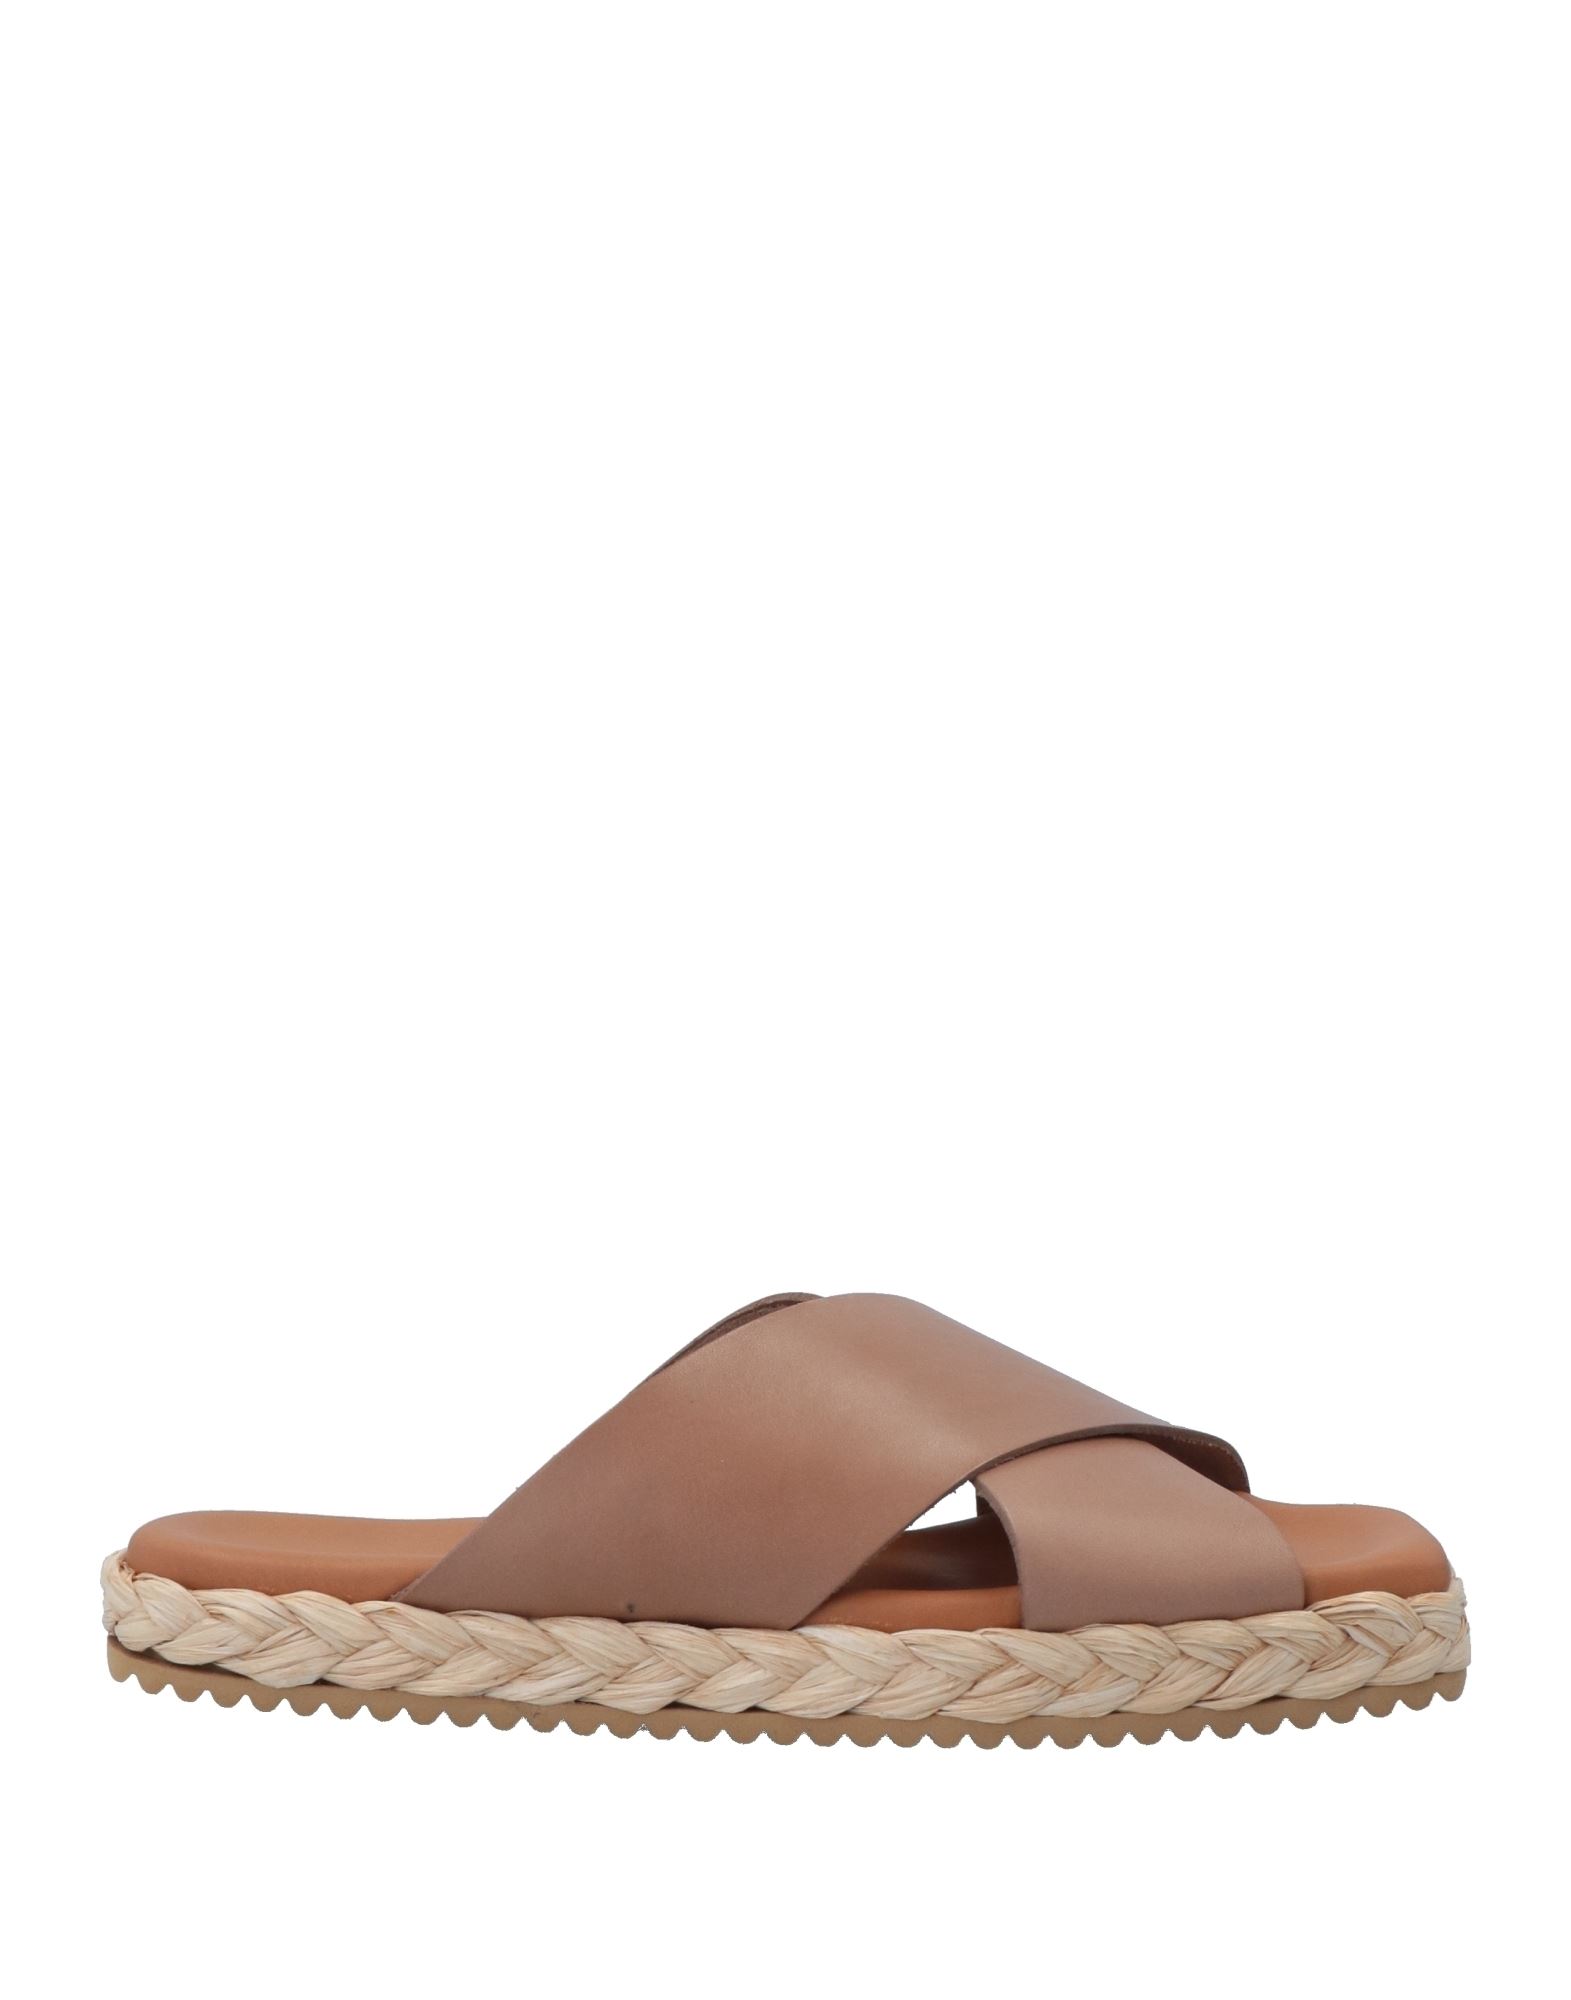 EQÜITARE EQUITARE WOMAN ESPADRILLES LIGHT BROWN SIZE 6 SOFT LEATHER